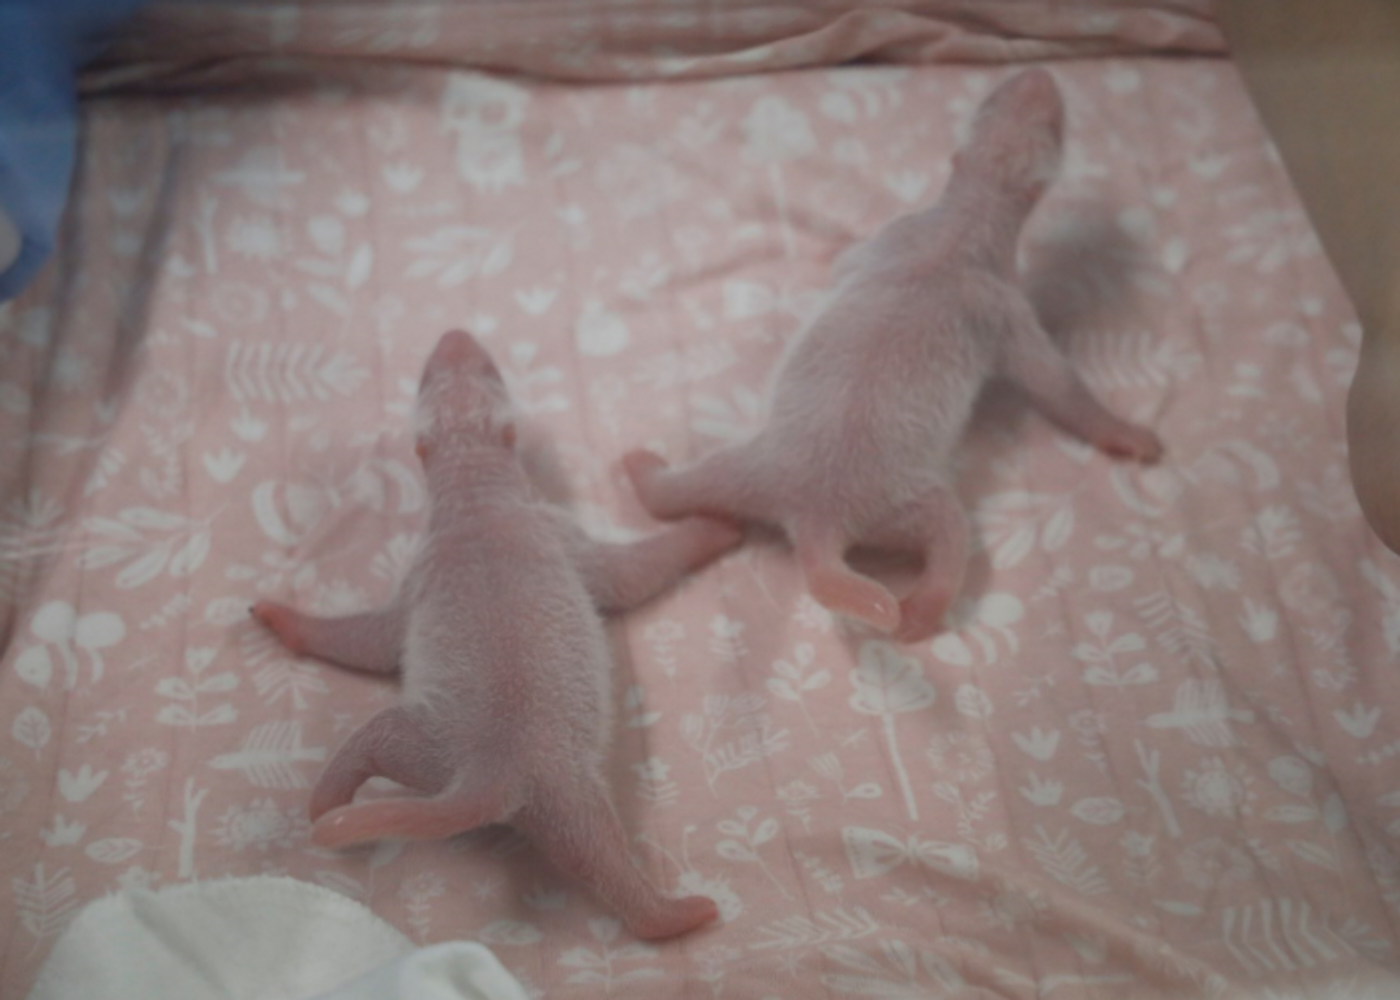 These are the two panda cub twins that were born at the Pairi Daiza zoo on Thursday.